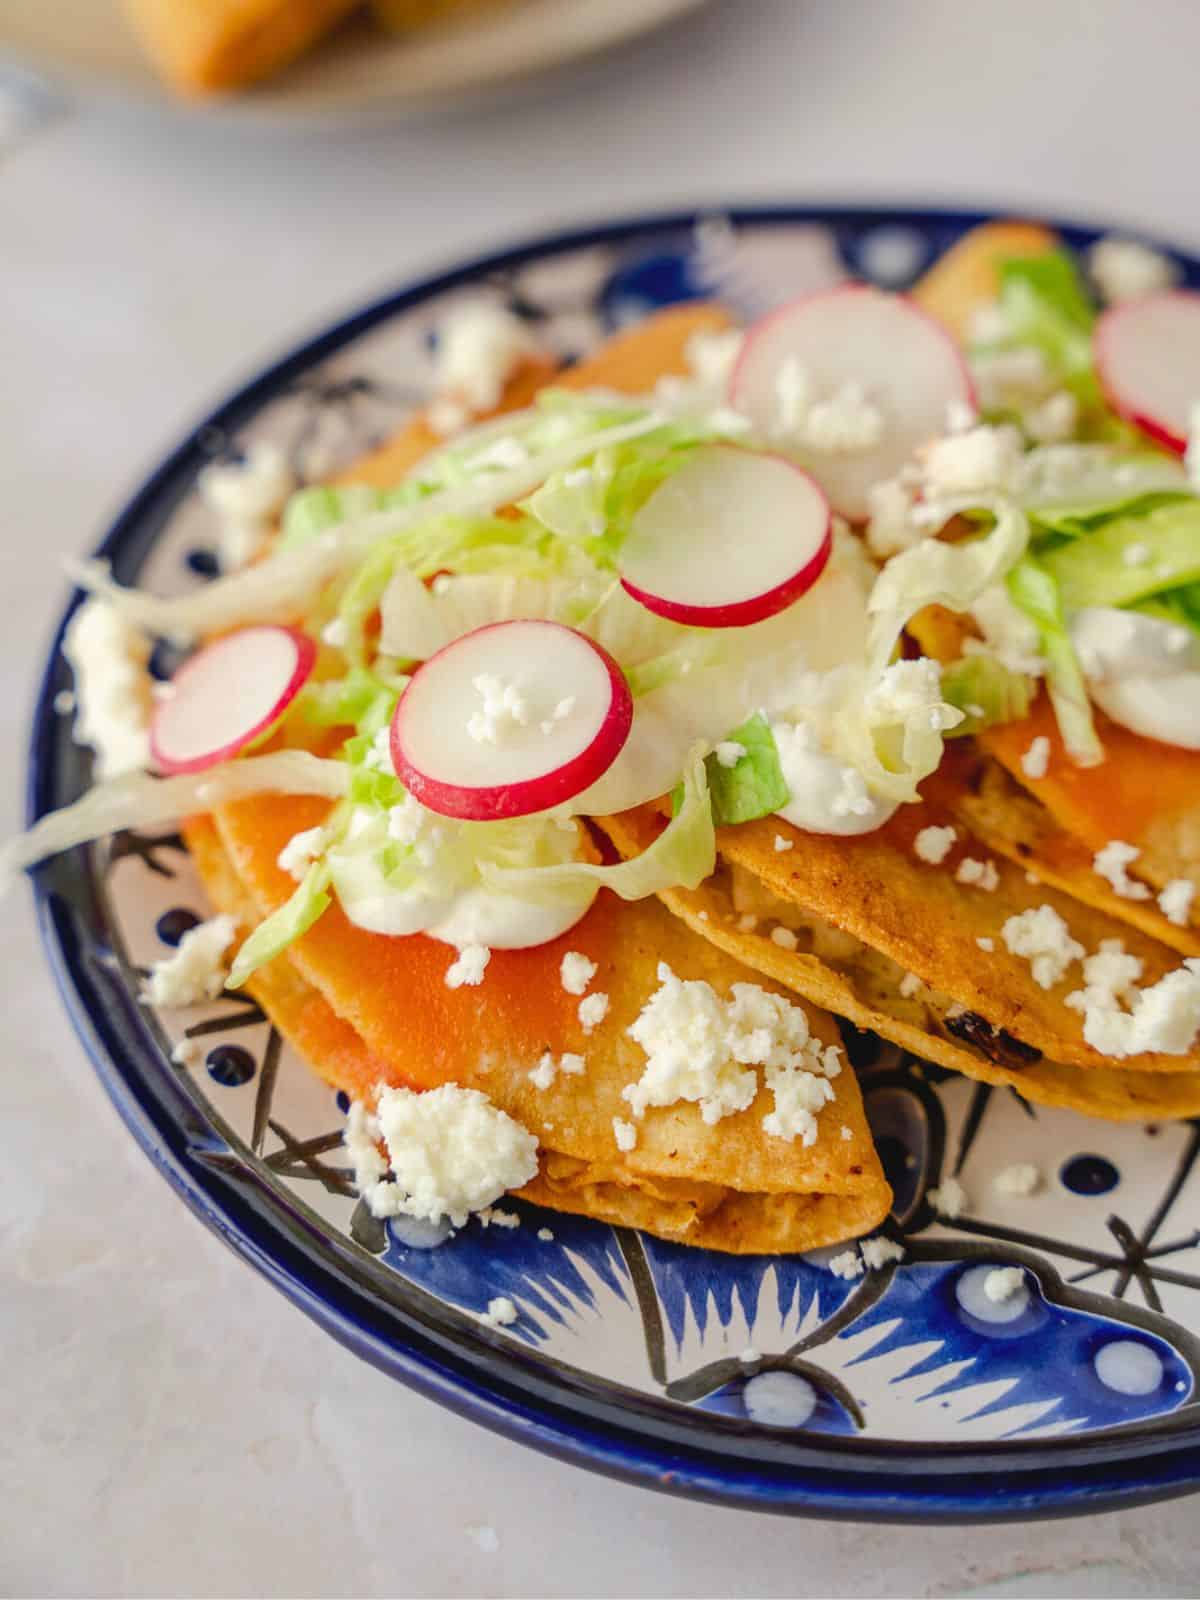 Tacos dorados on a plate with salsa and toppings.